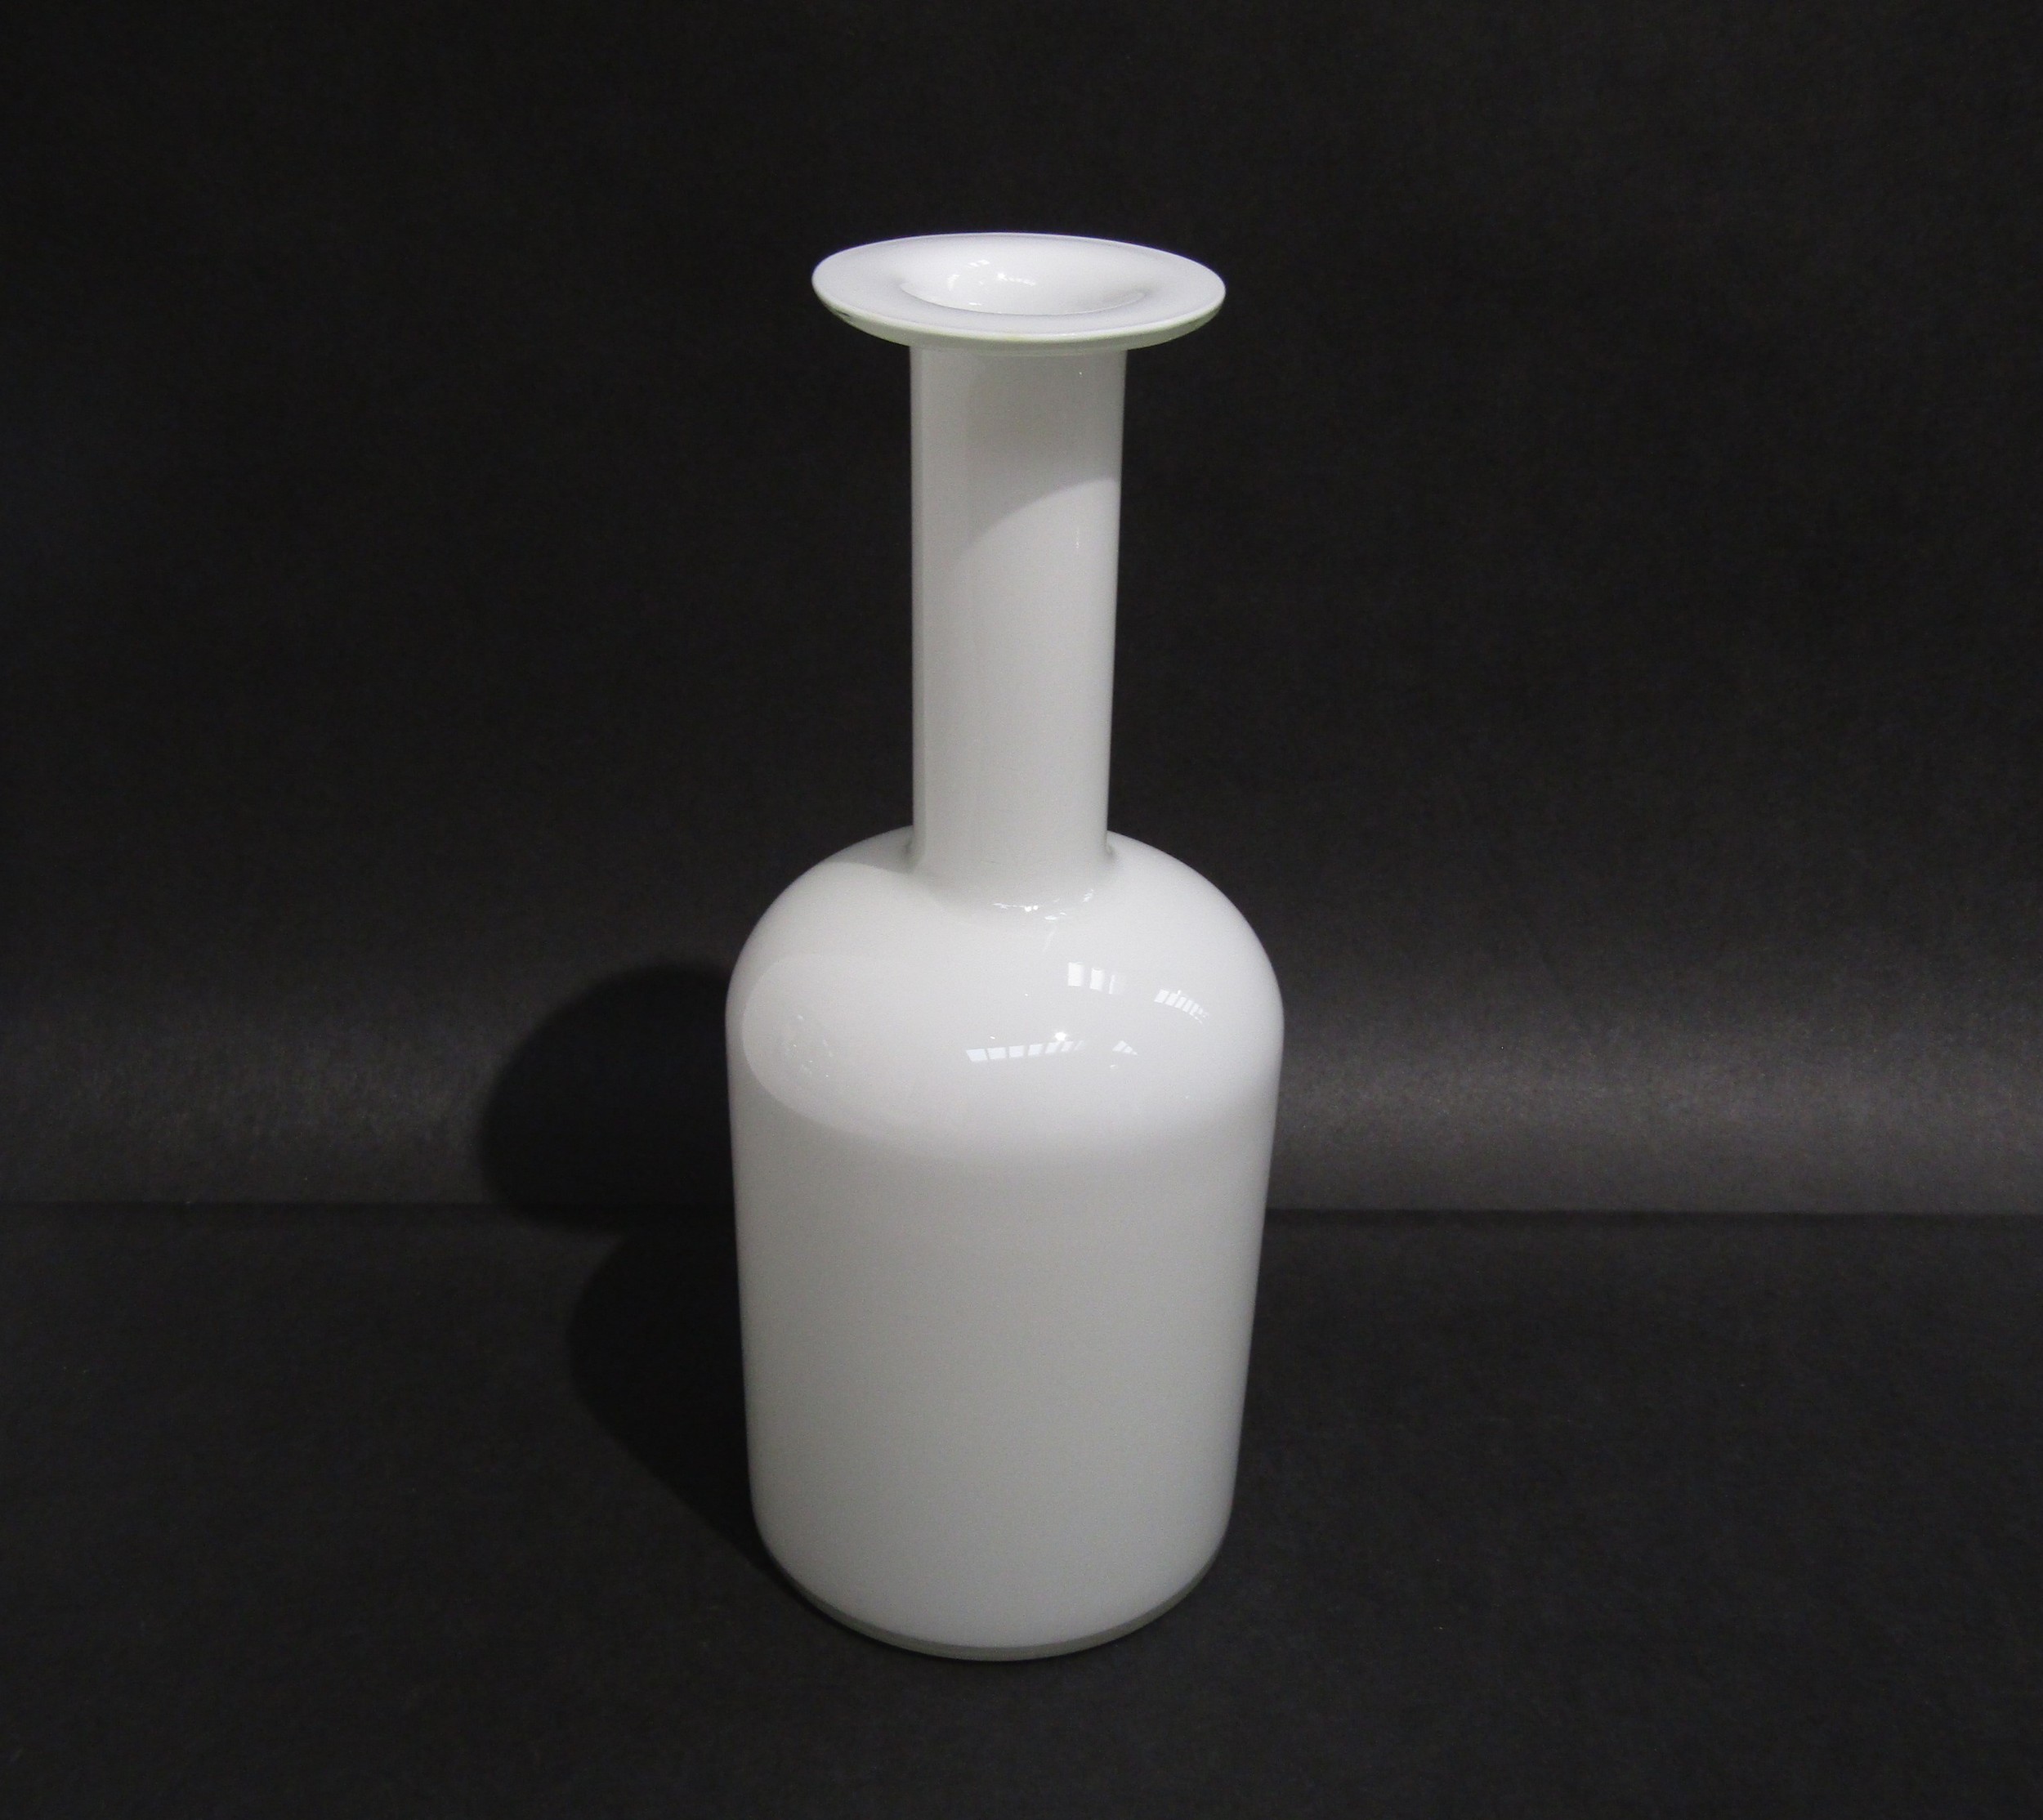 A Holmegaard "Gul" vase in opal glass designed in 1960's by Otto Brauer, 37cm high